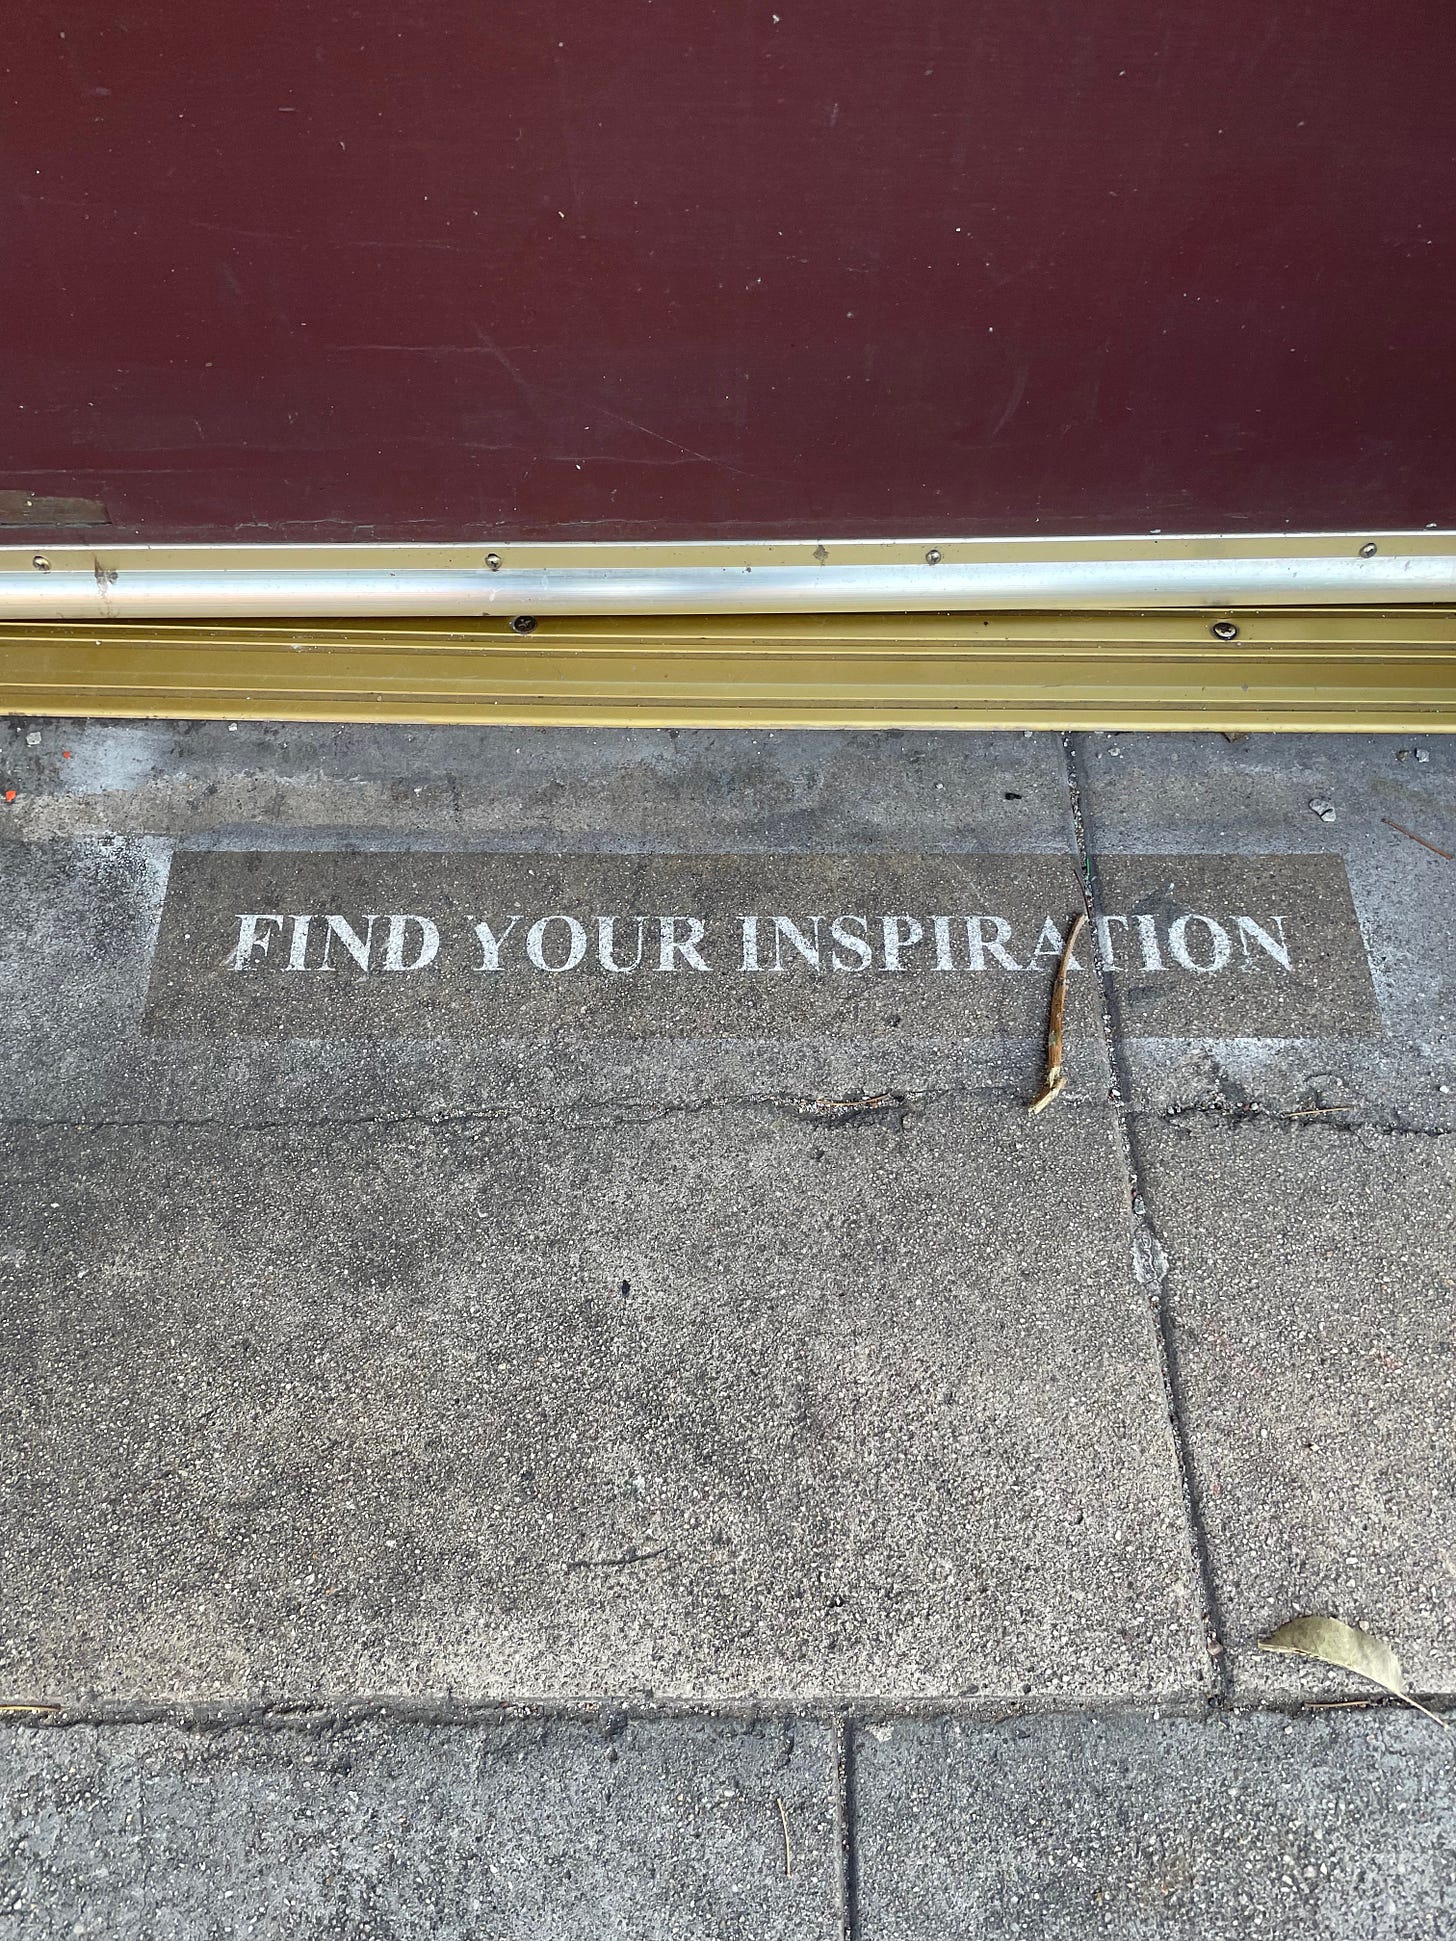 A section of pavement next to the bottom of a maroon doorway where the words "Find your inspiration" have been stenciled in.